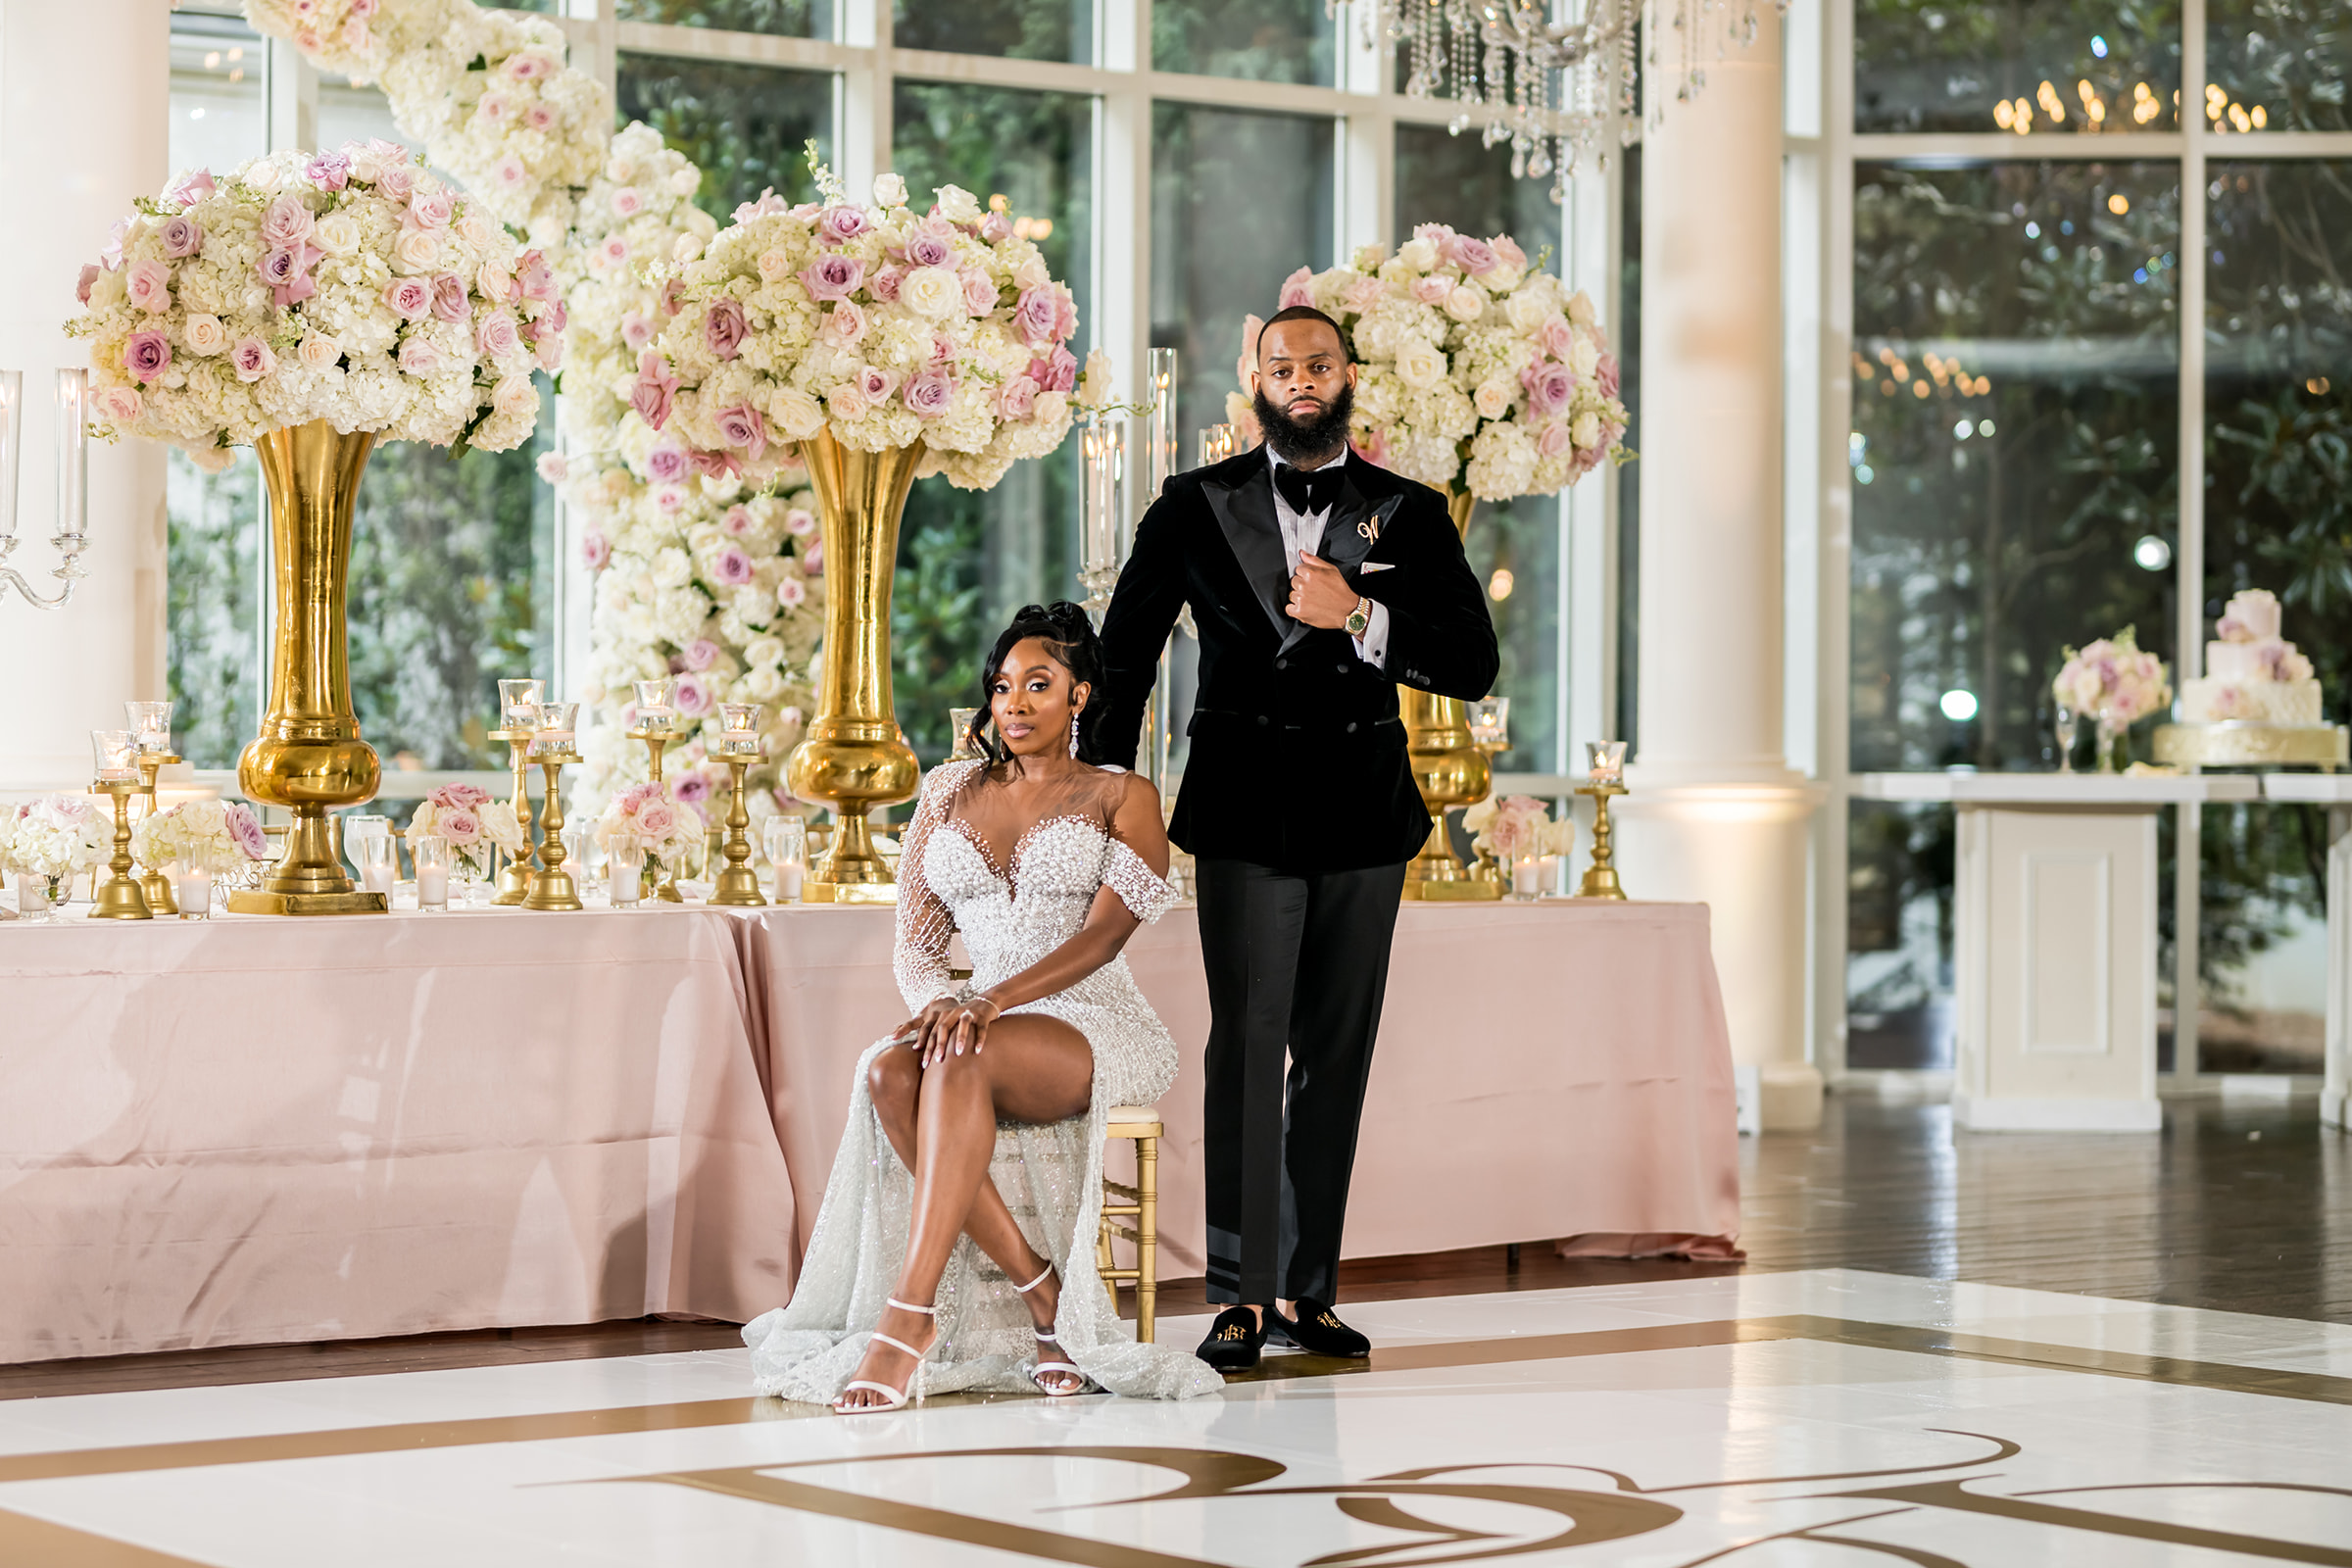 Reception reveal for the newlyweds at Ashton Gardens Atlanta with Jgraced photography